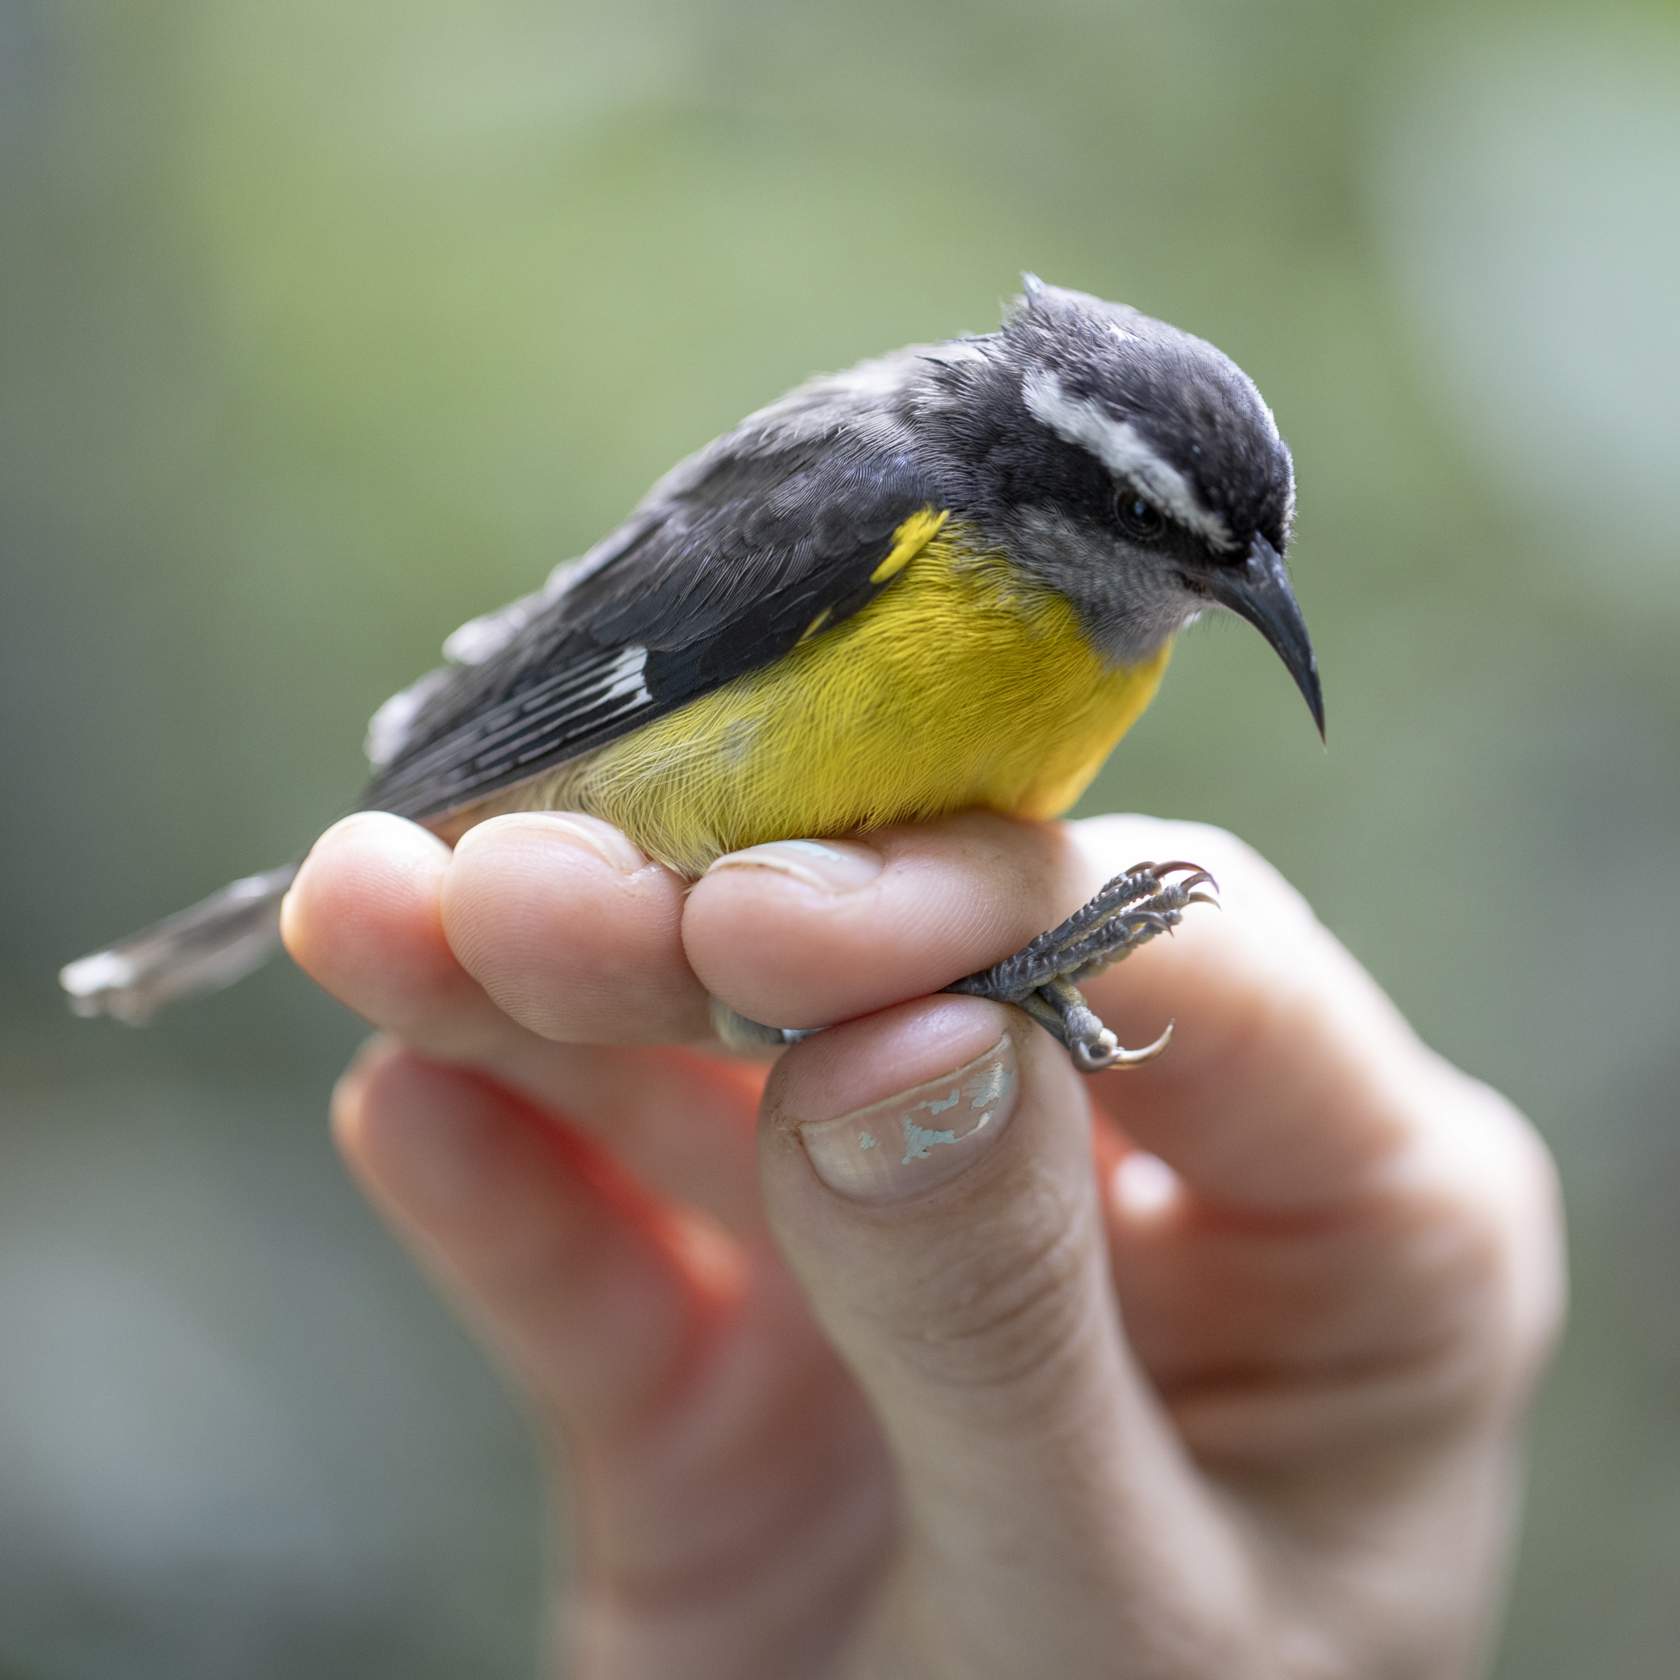 a small black and yellow bird held in a specialist's hand